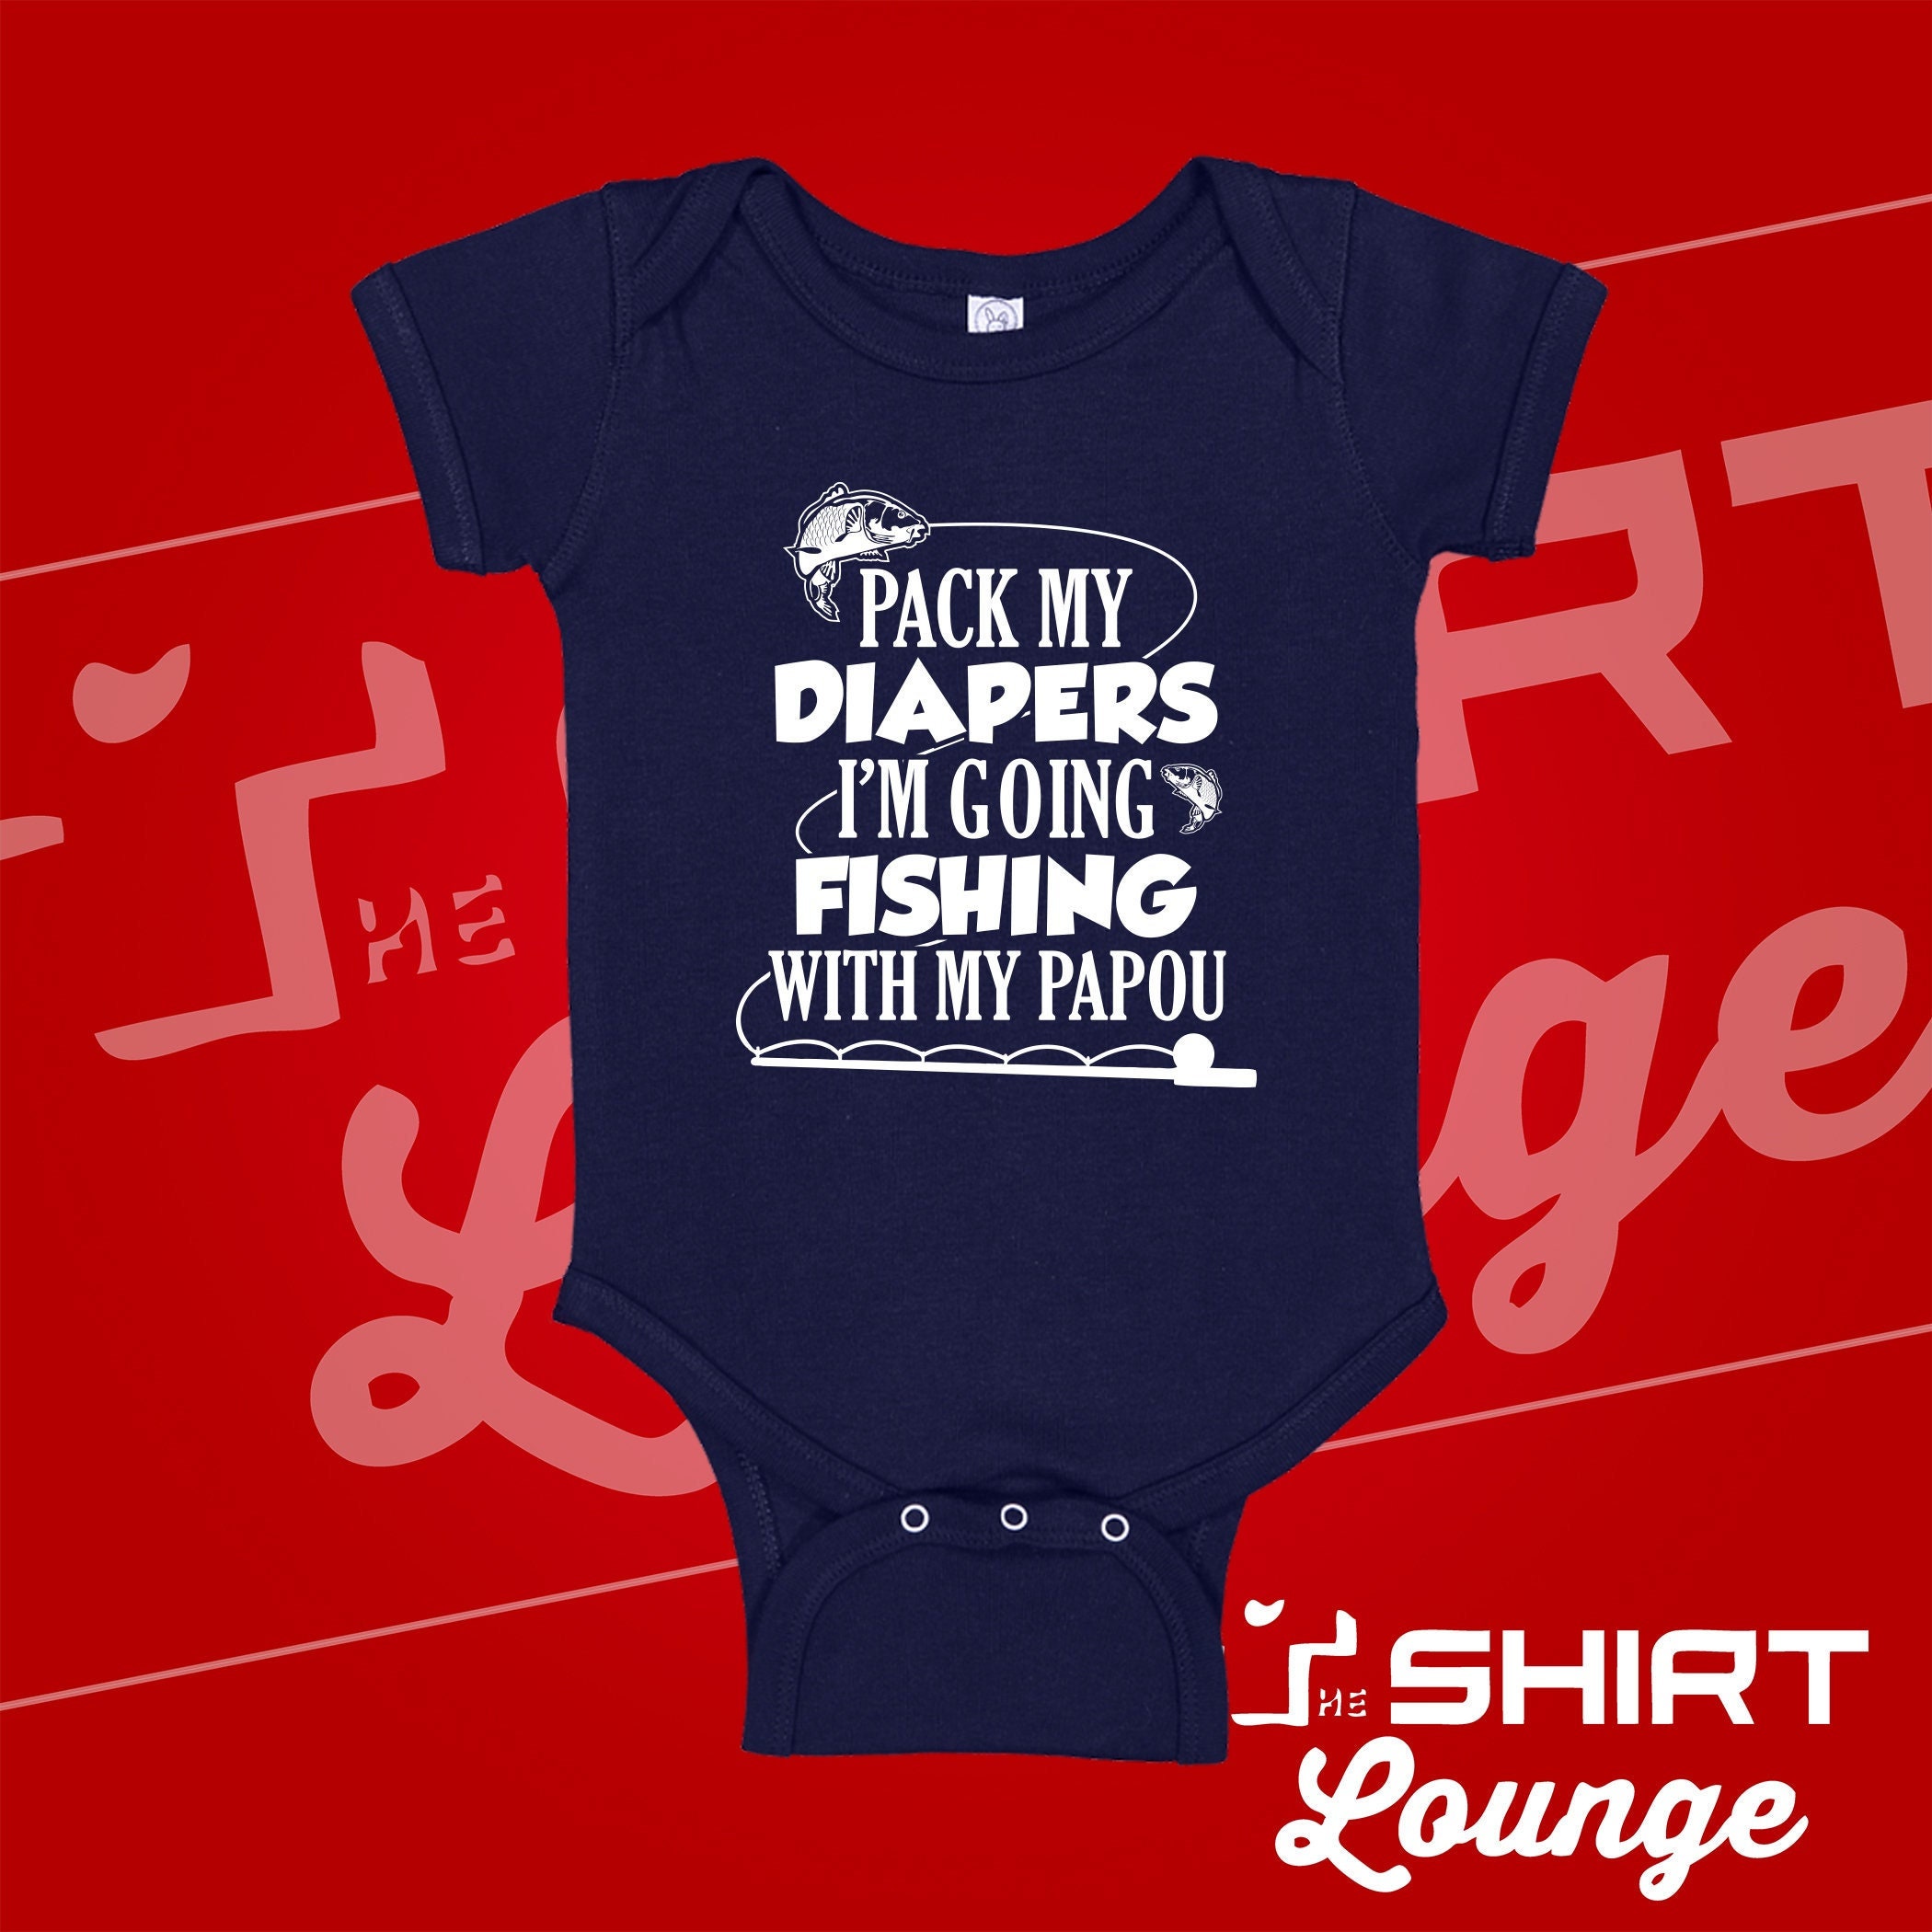 Papou Baby Clothes, I'm Going Fishing With Papou Bodysuit One